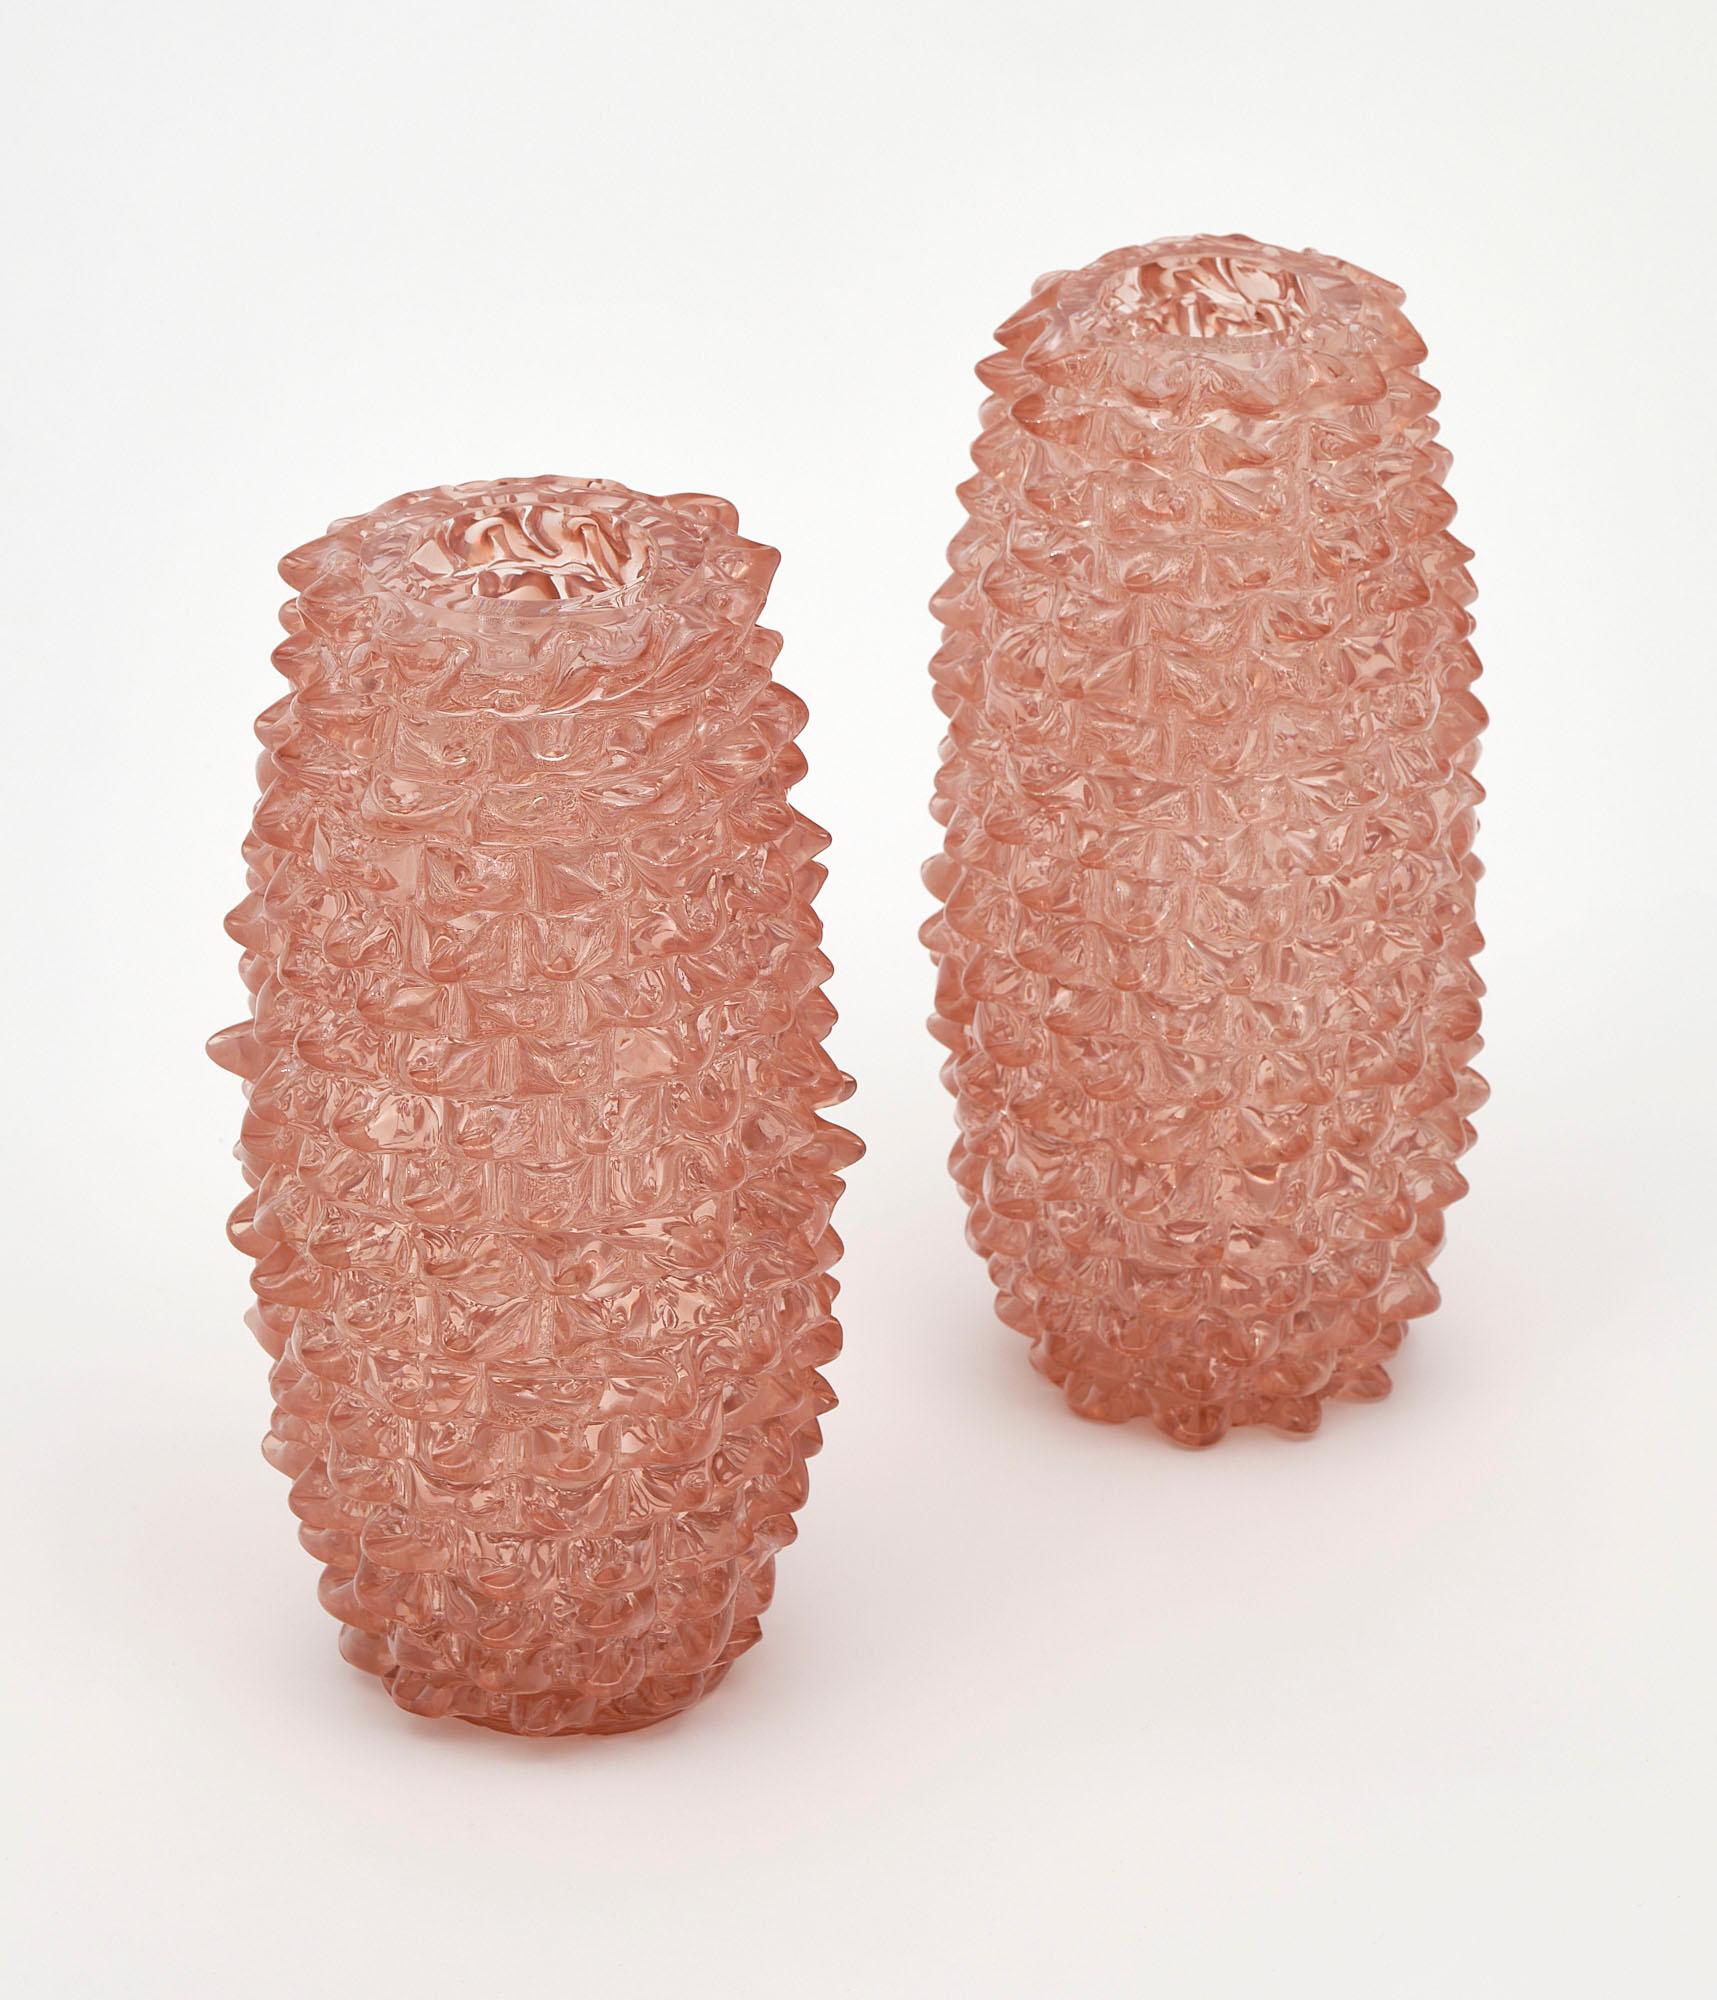 Pair of vases from the island of Murano made of hand-blown glass crafted in the “rostrate” technique (beaked). We love the beautiful pink tone!